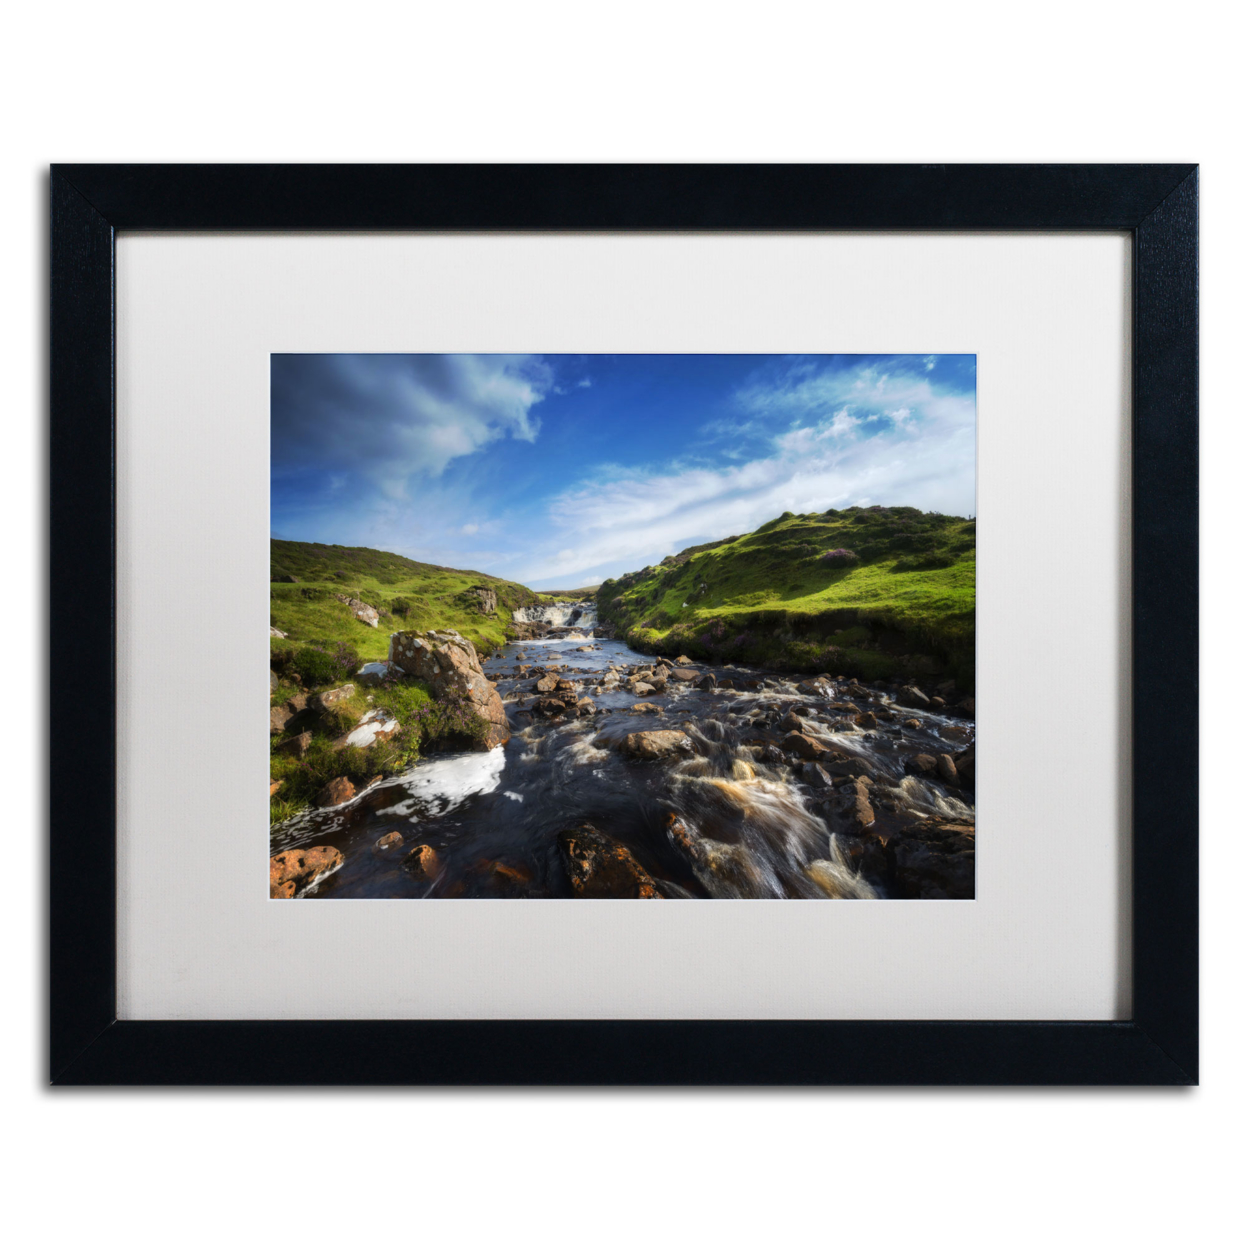 Philippe Sainte-Laudy 'Scottish River' Black Wooden Framed Art 18 X 22 Inches